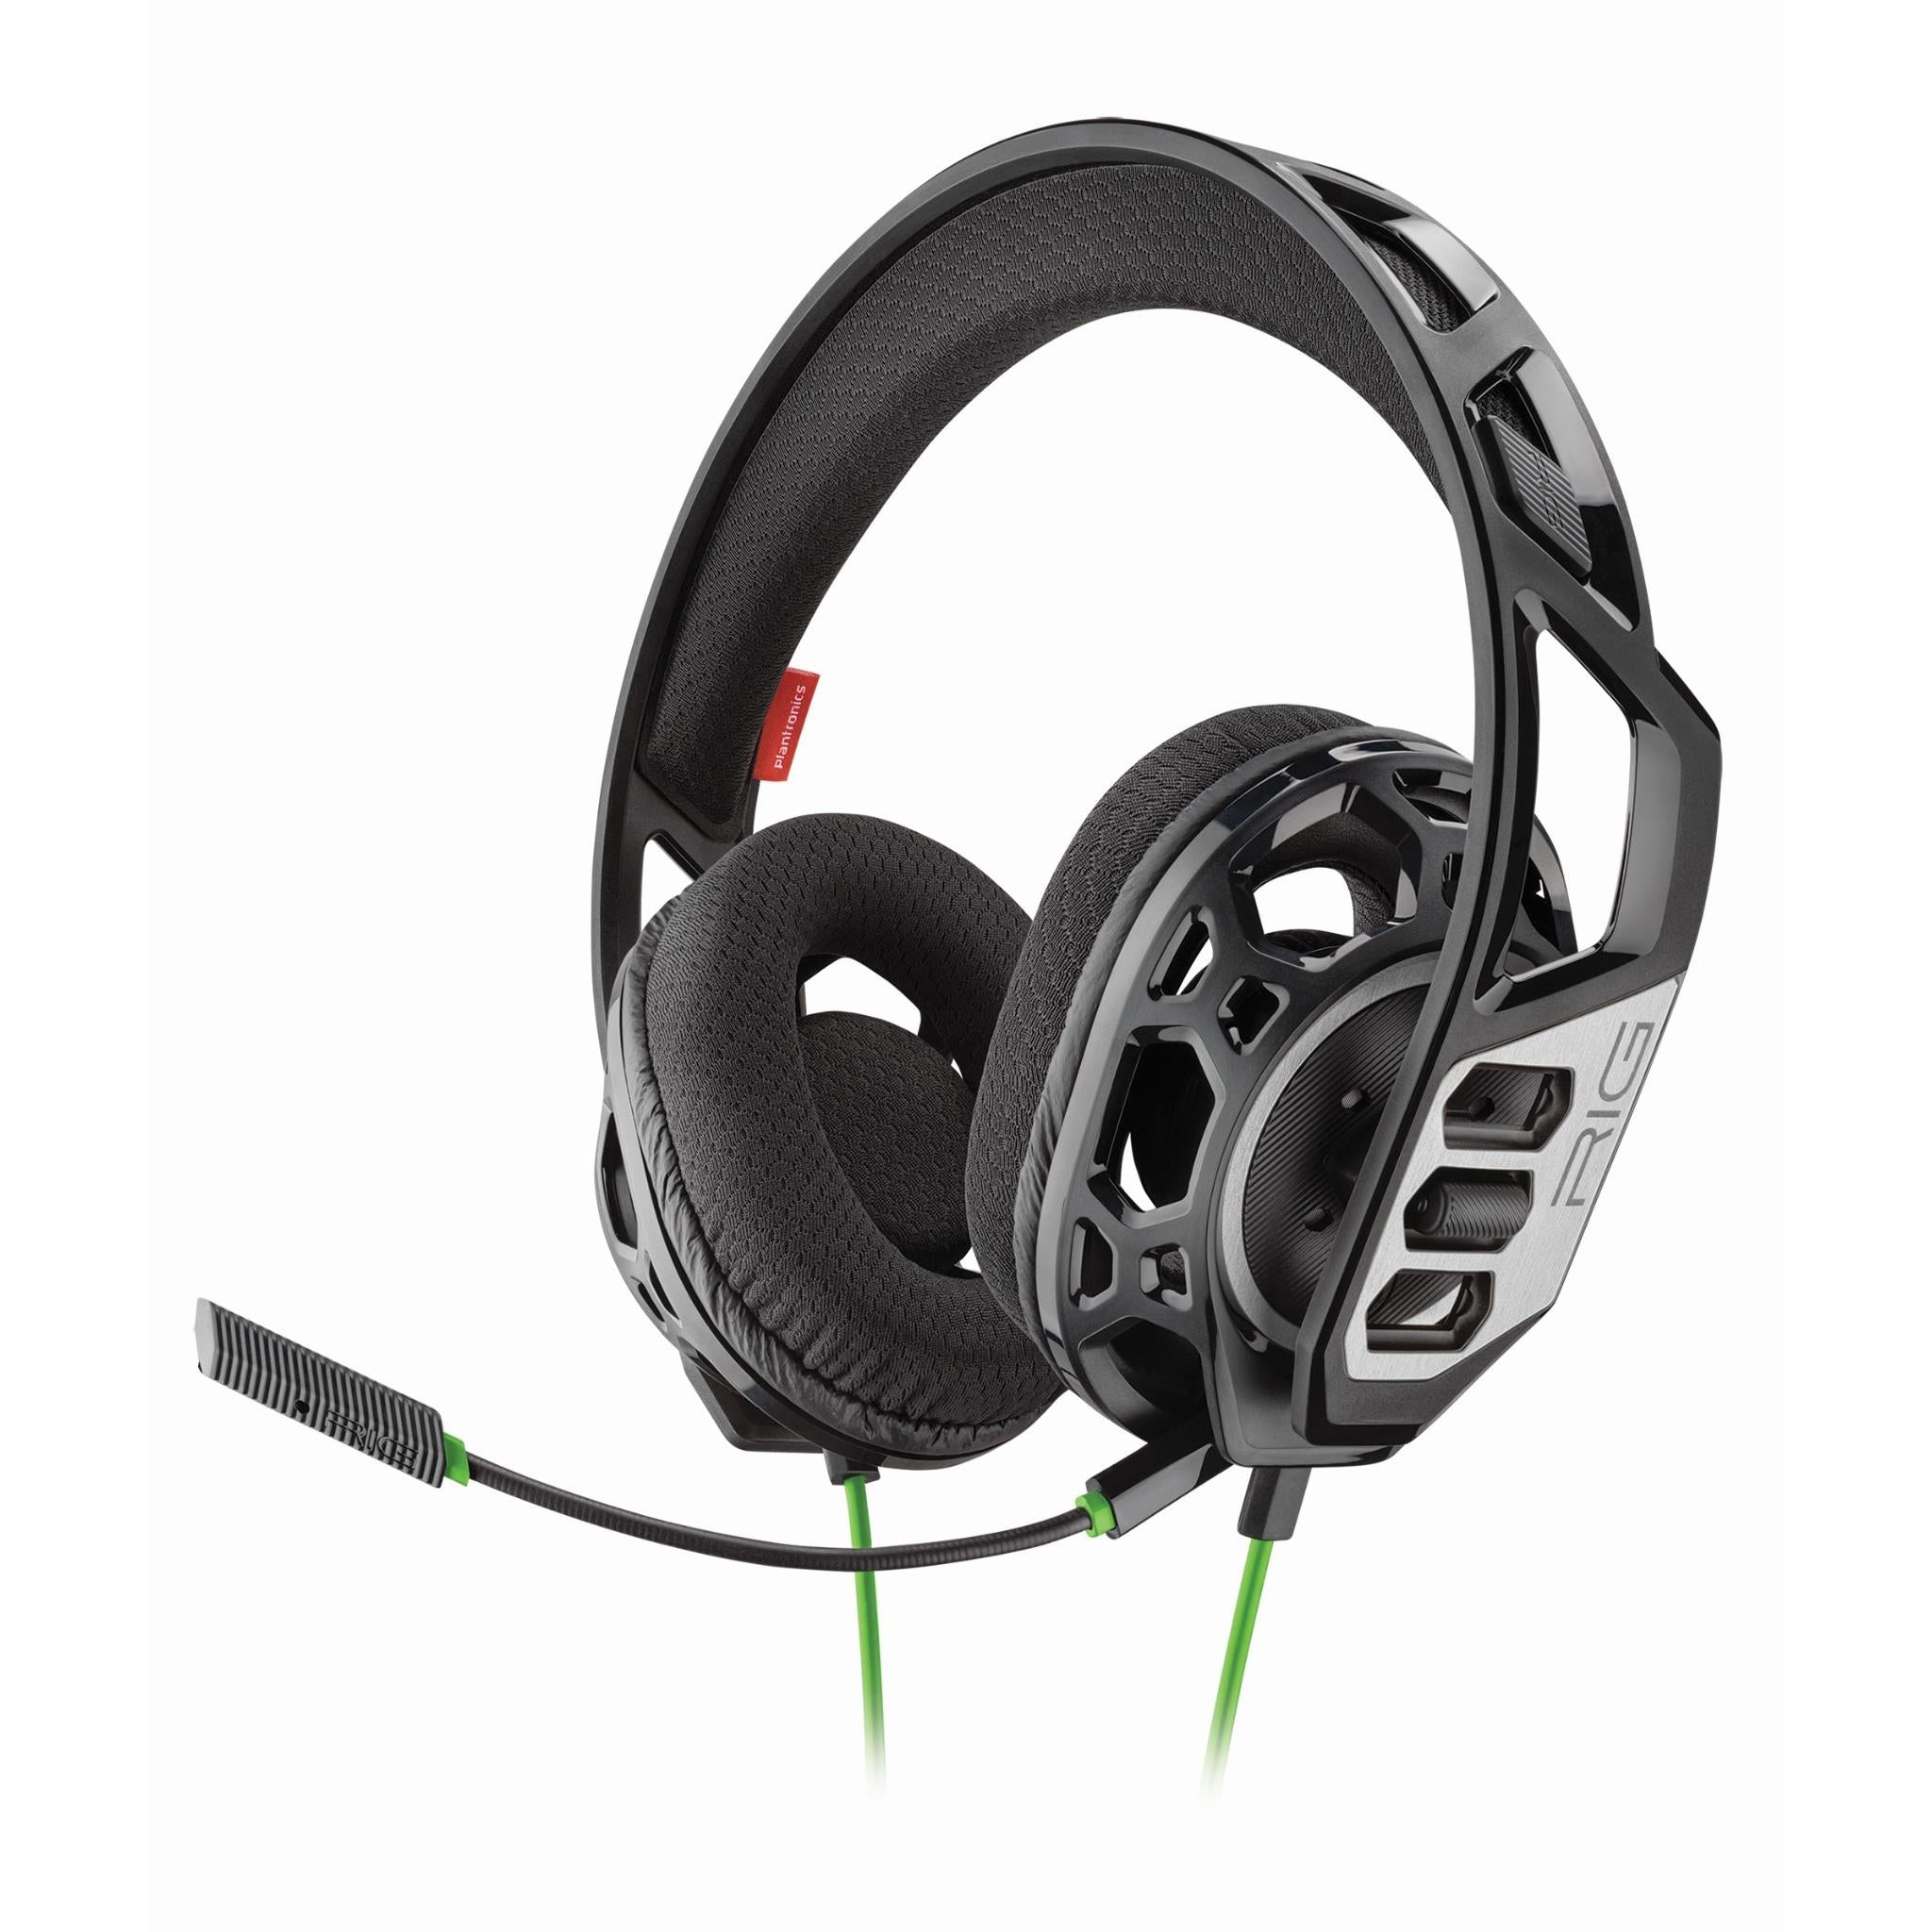 rig 300 hx stereo gaming headset for xbox one